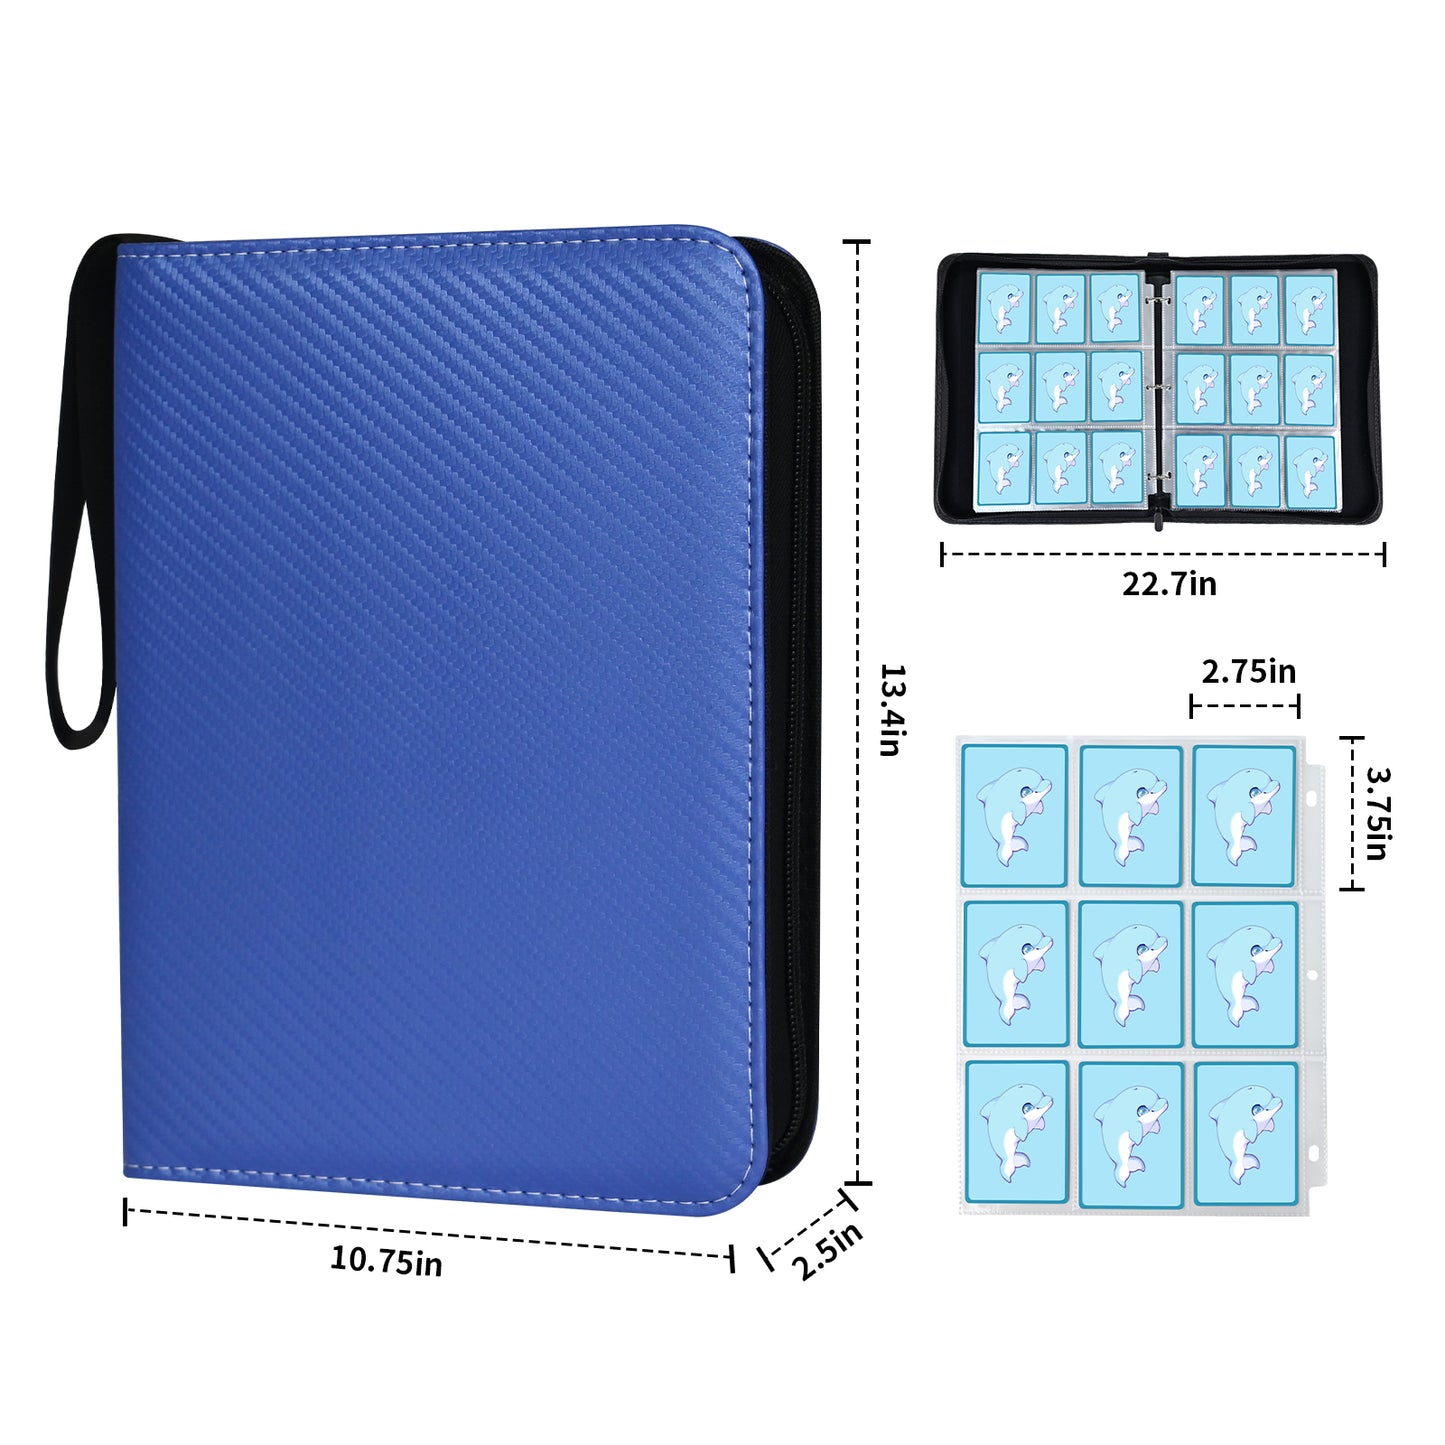 9-Pockets Trading Card Binder with Sleeves,Card Binder Collect Holder Case,900 Pockets Zipper Binder Case Album for Boys Girls